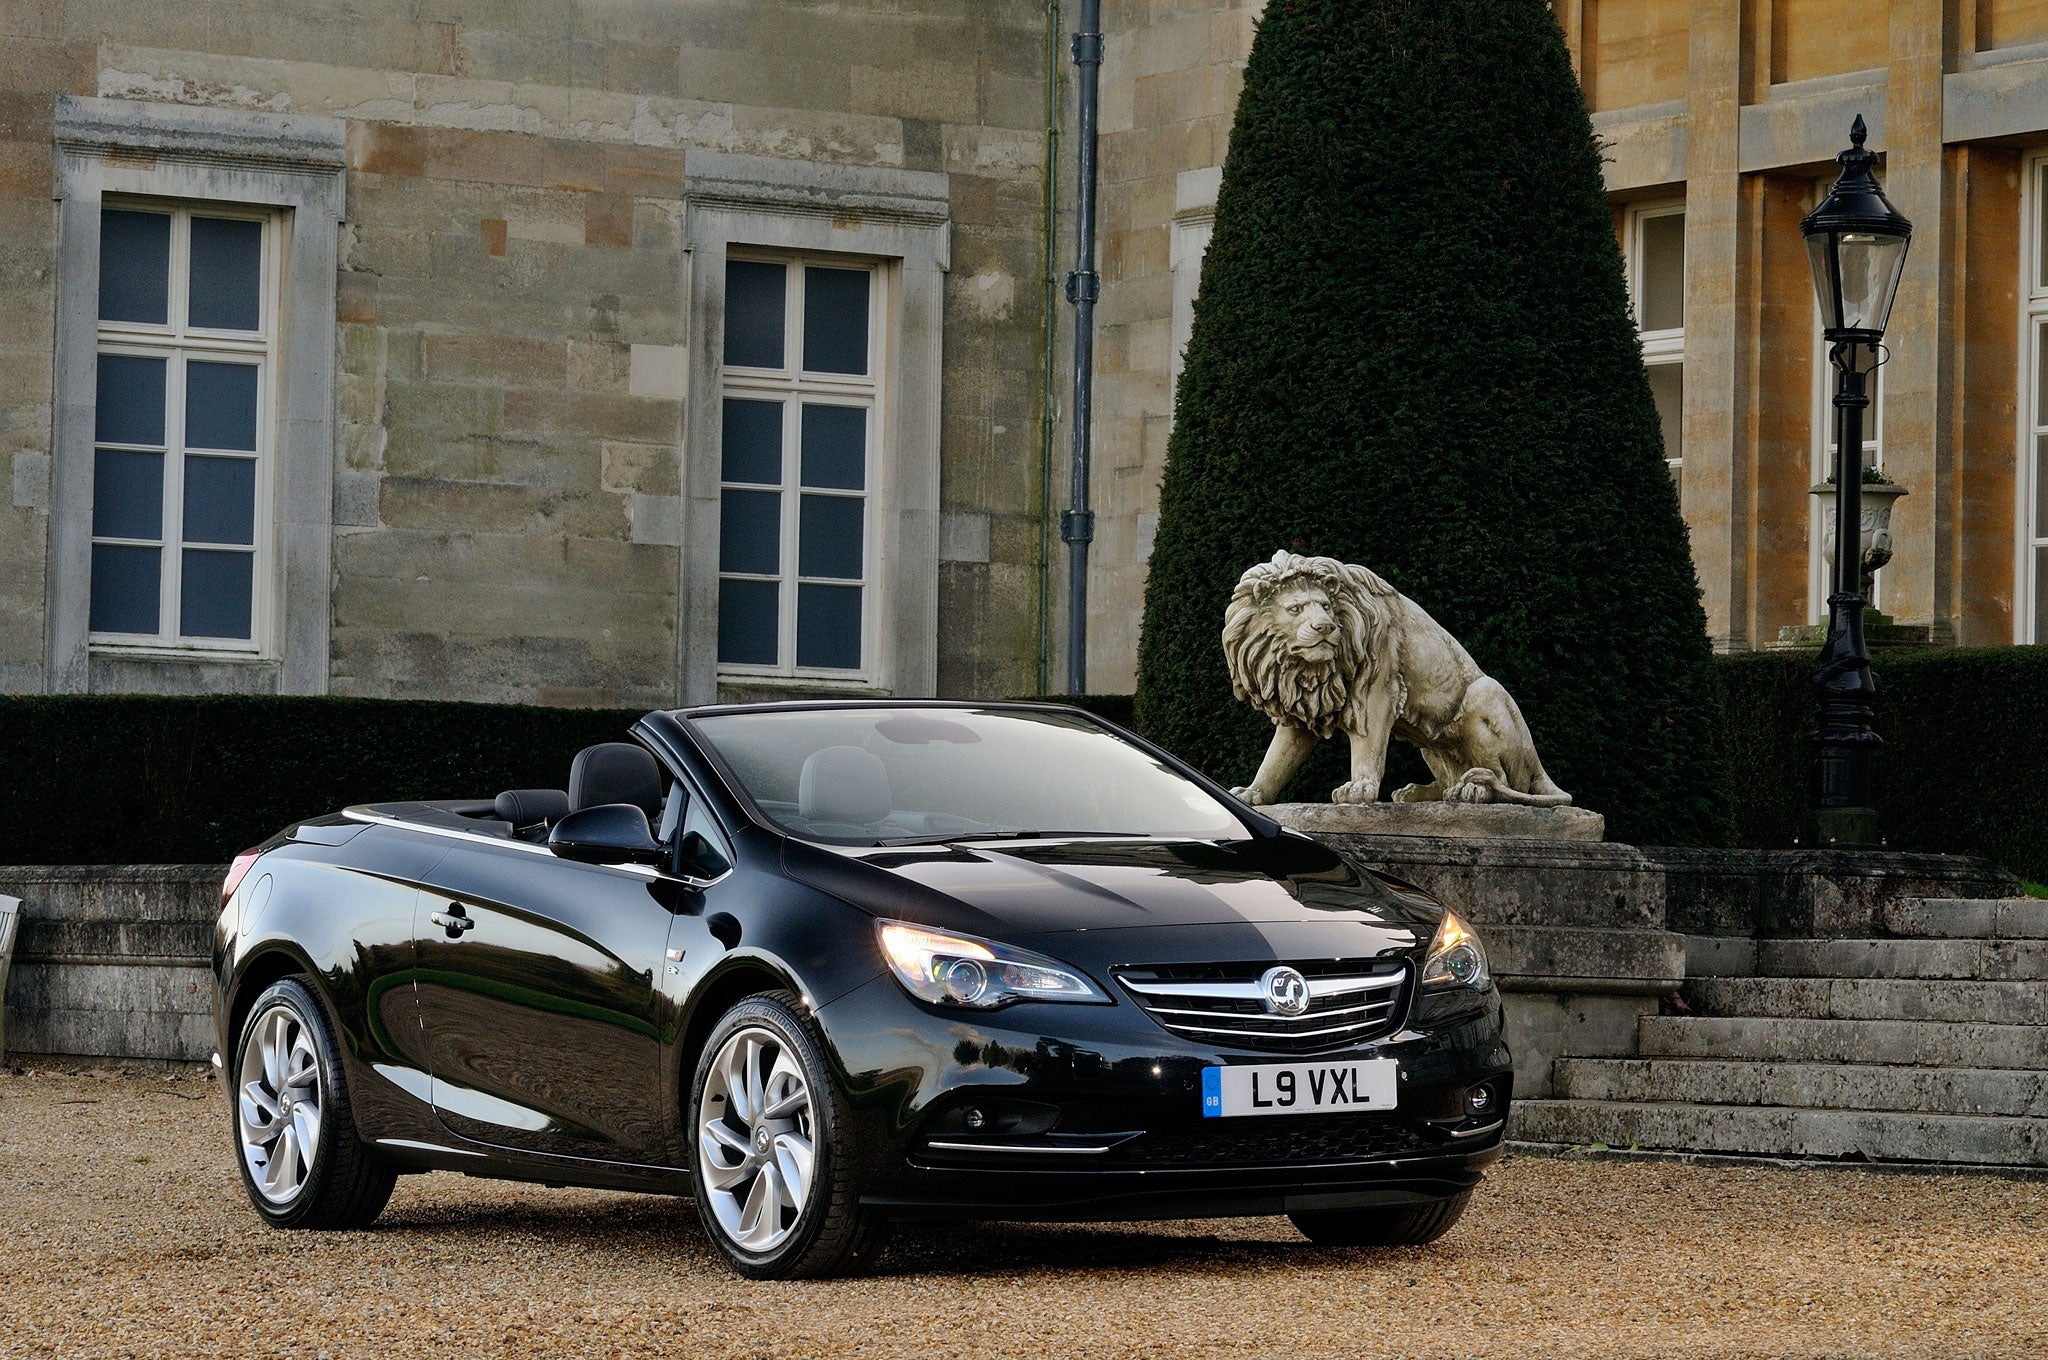 The Vauxhall Cascada is a very likeable convertible